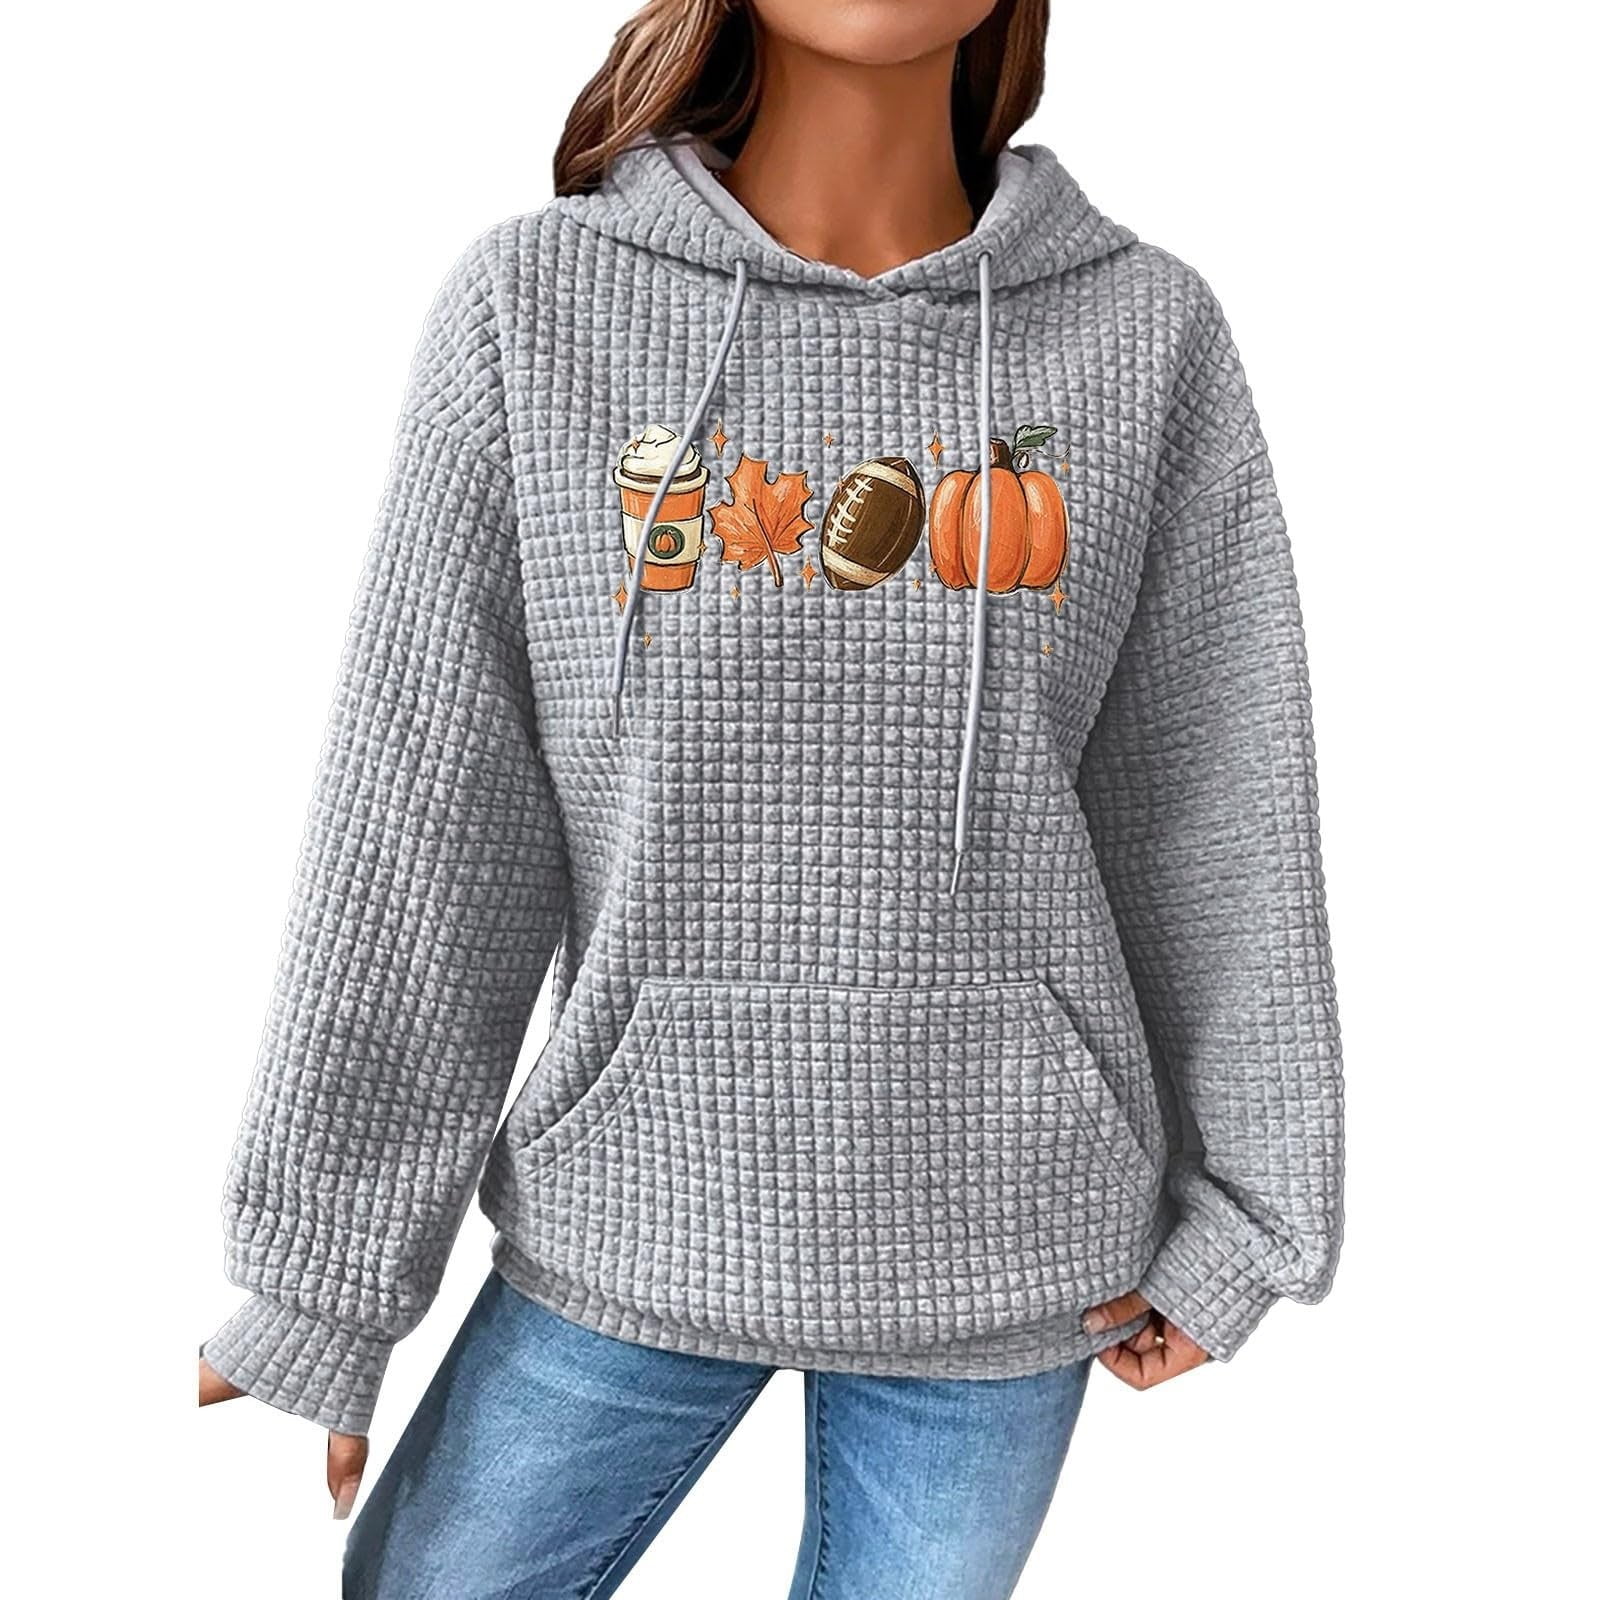  Hugeoxy Crewneck Pullover Women Floral Printed Loose Fit,Pullover  Sweatshirt,Fall Sweatshirts Coffee,Sleeveless Hoodies,White Cropped Hoodie,Plus  Size Long Sleeve Shirt,Orange Sweaters Womens : Sports & Outdoors